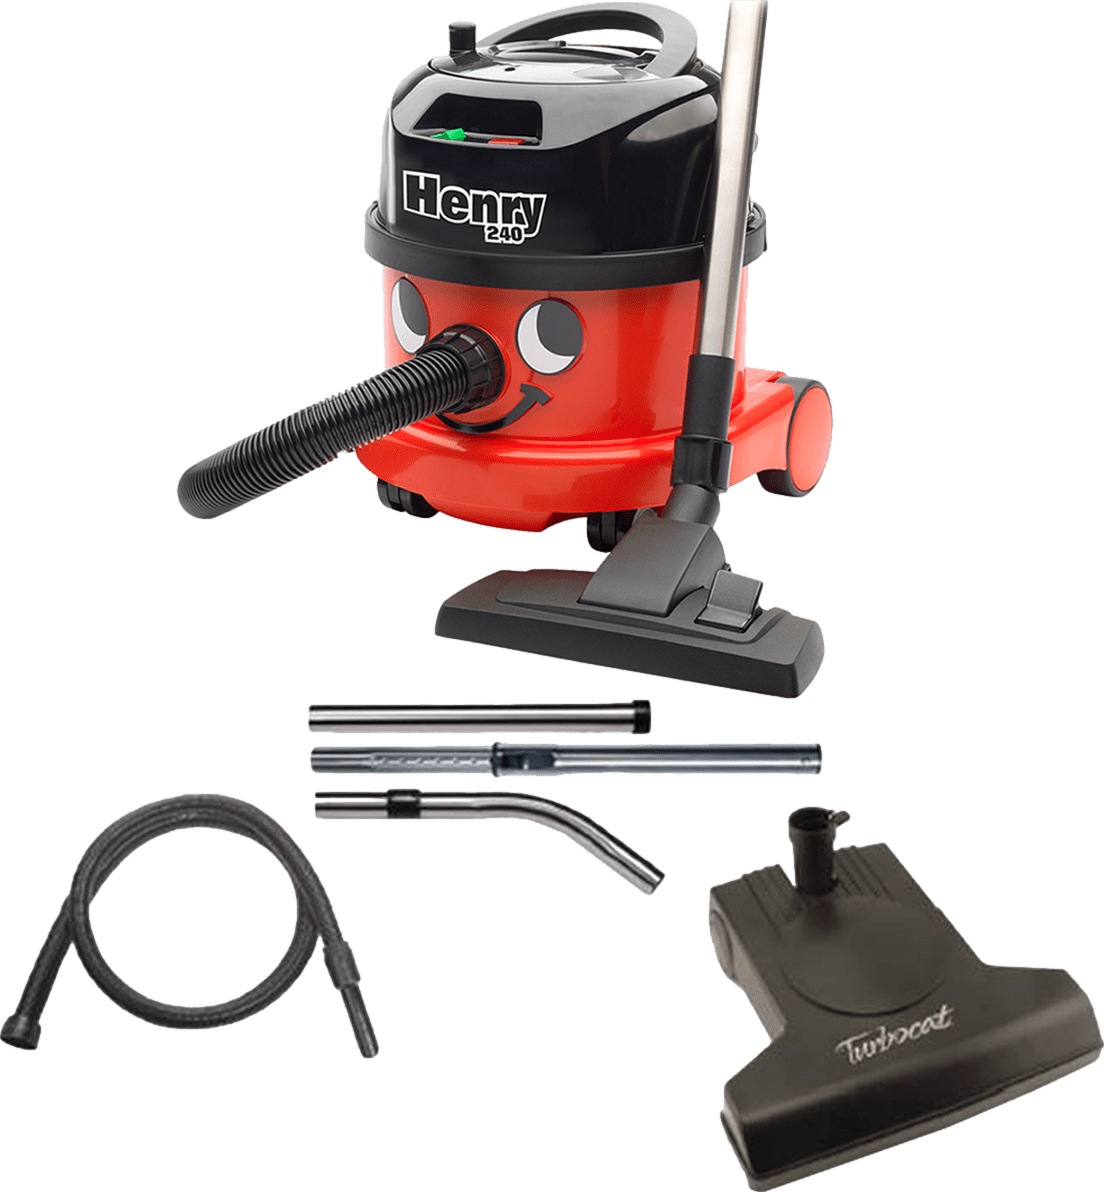 NaceCare PPR 240 with Air Driven Power Head - AST3 Canister Vacuum Cleaner